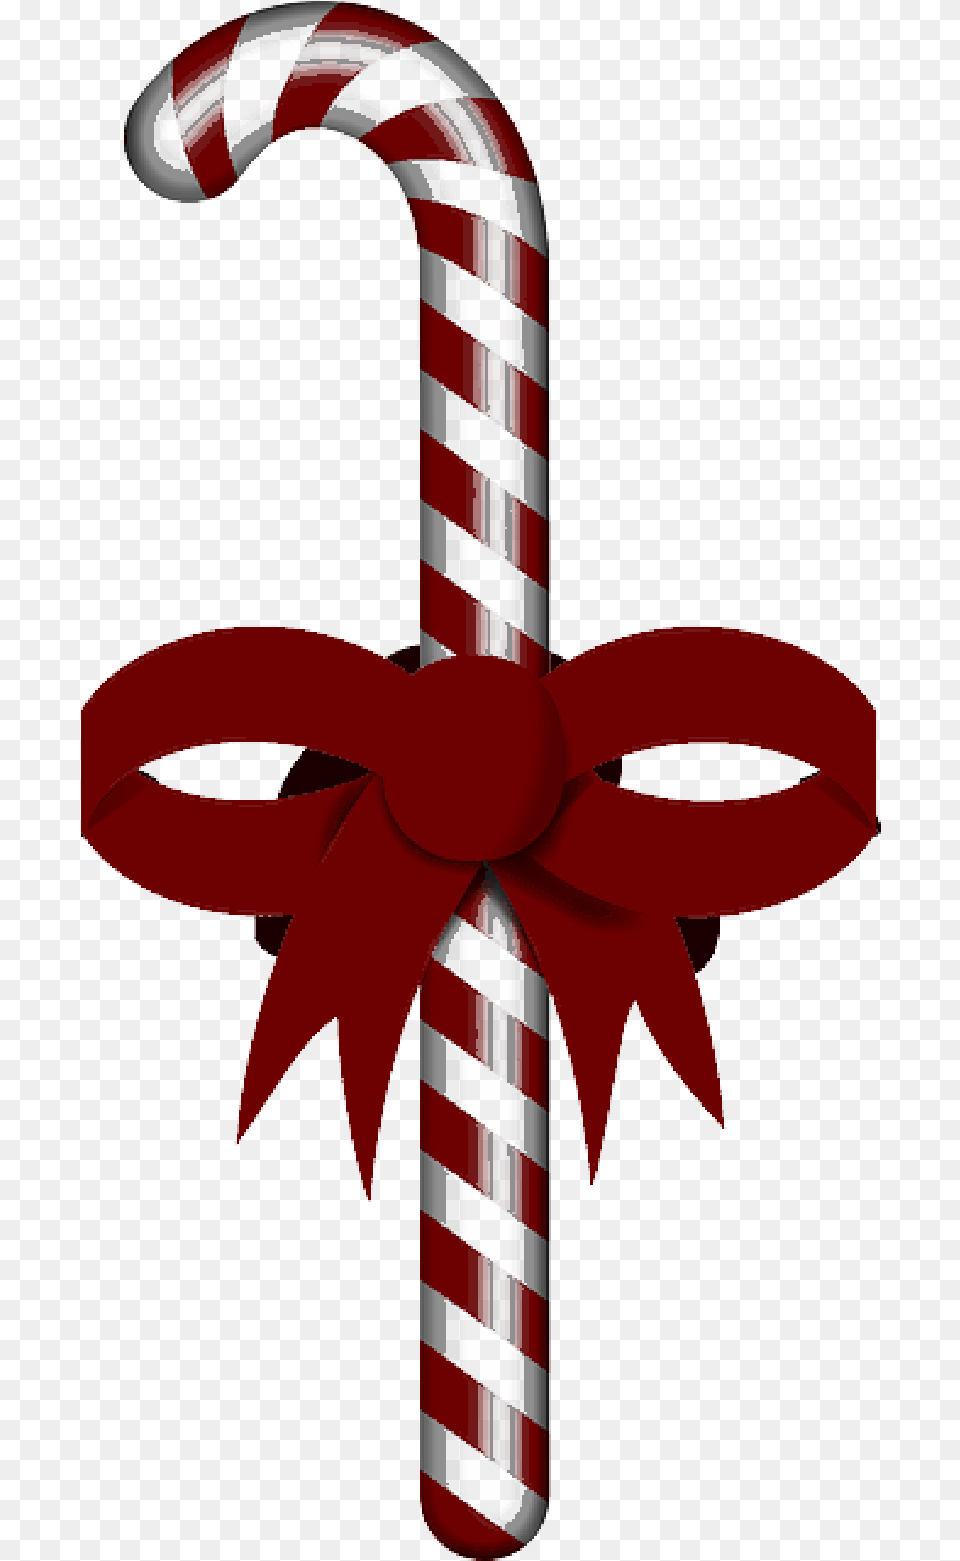 Red Stick Ribbon Candy Christmas Bow Public Domain Candy Cane Clip Art, Food, Sweets, Dynamite, Weapon Png Image